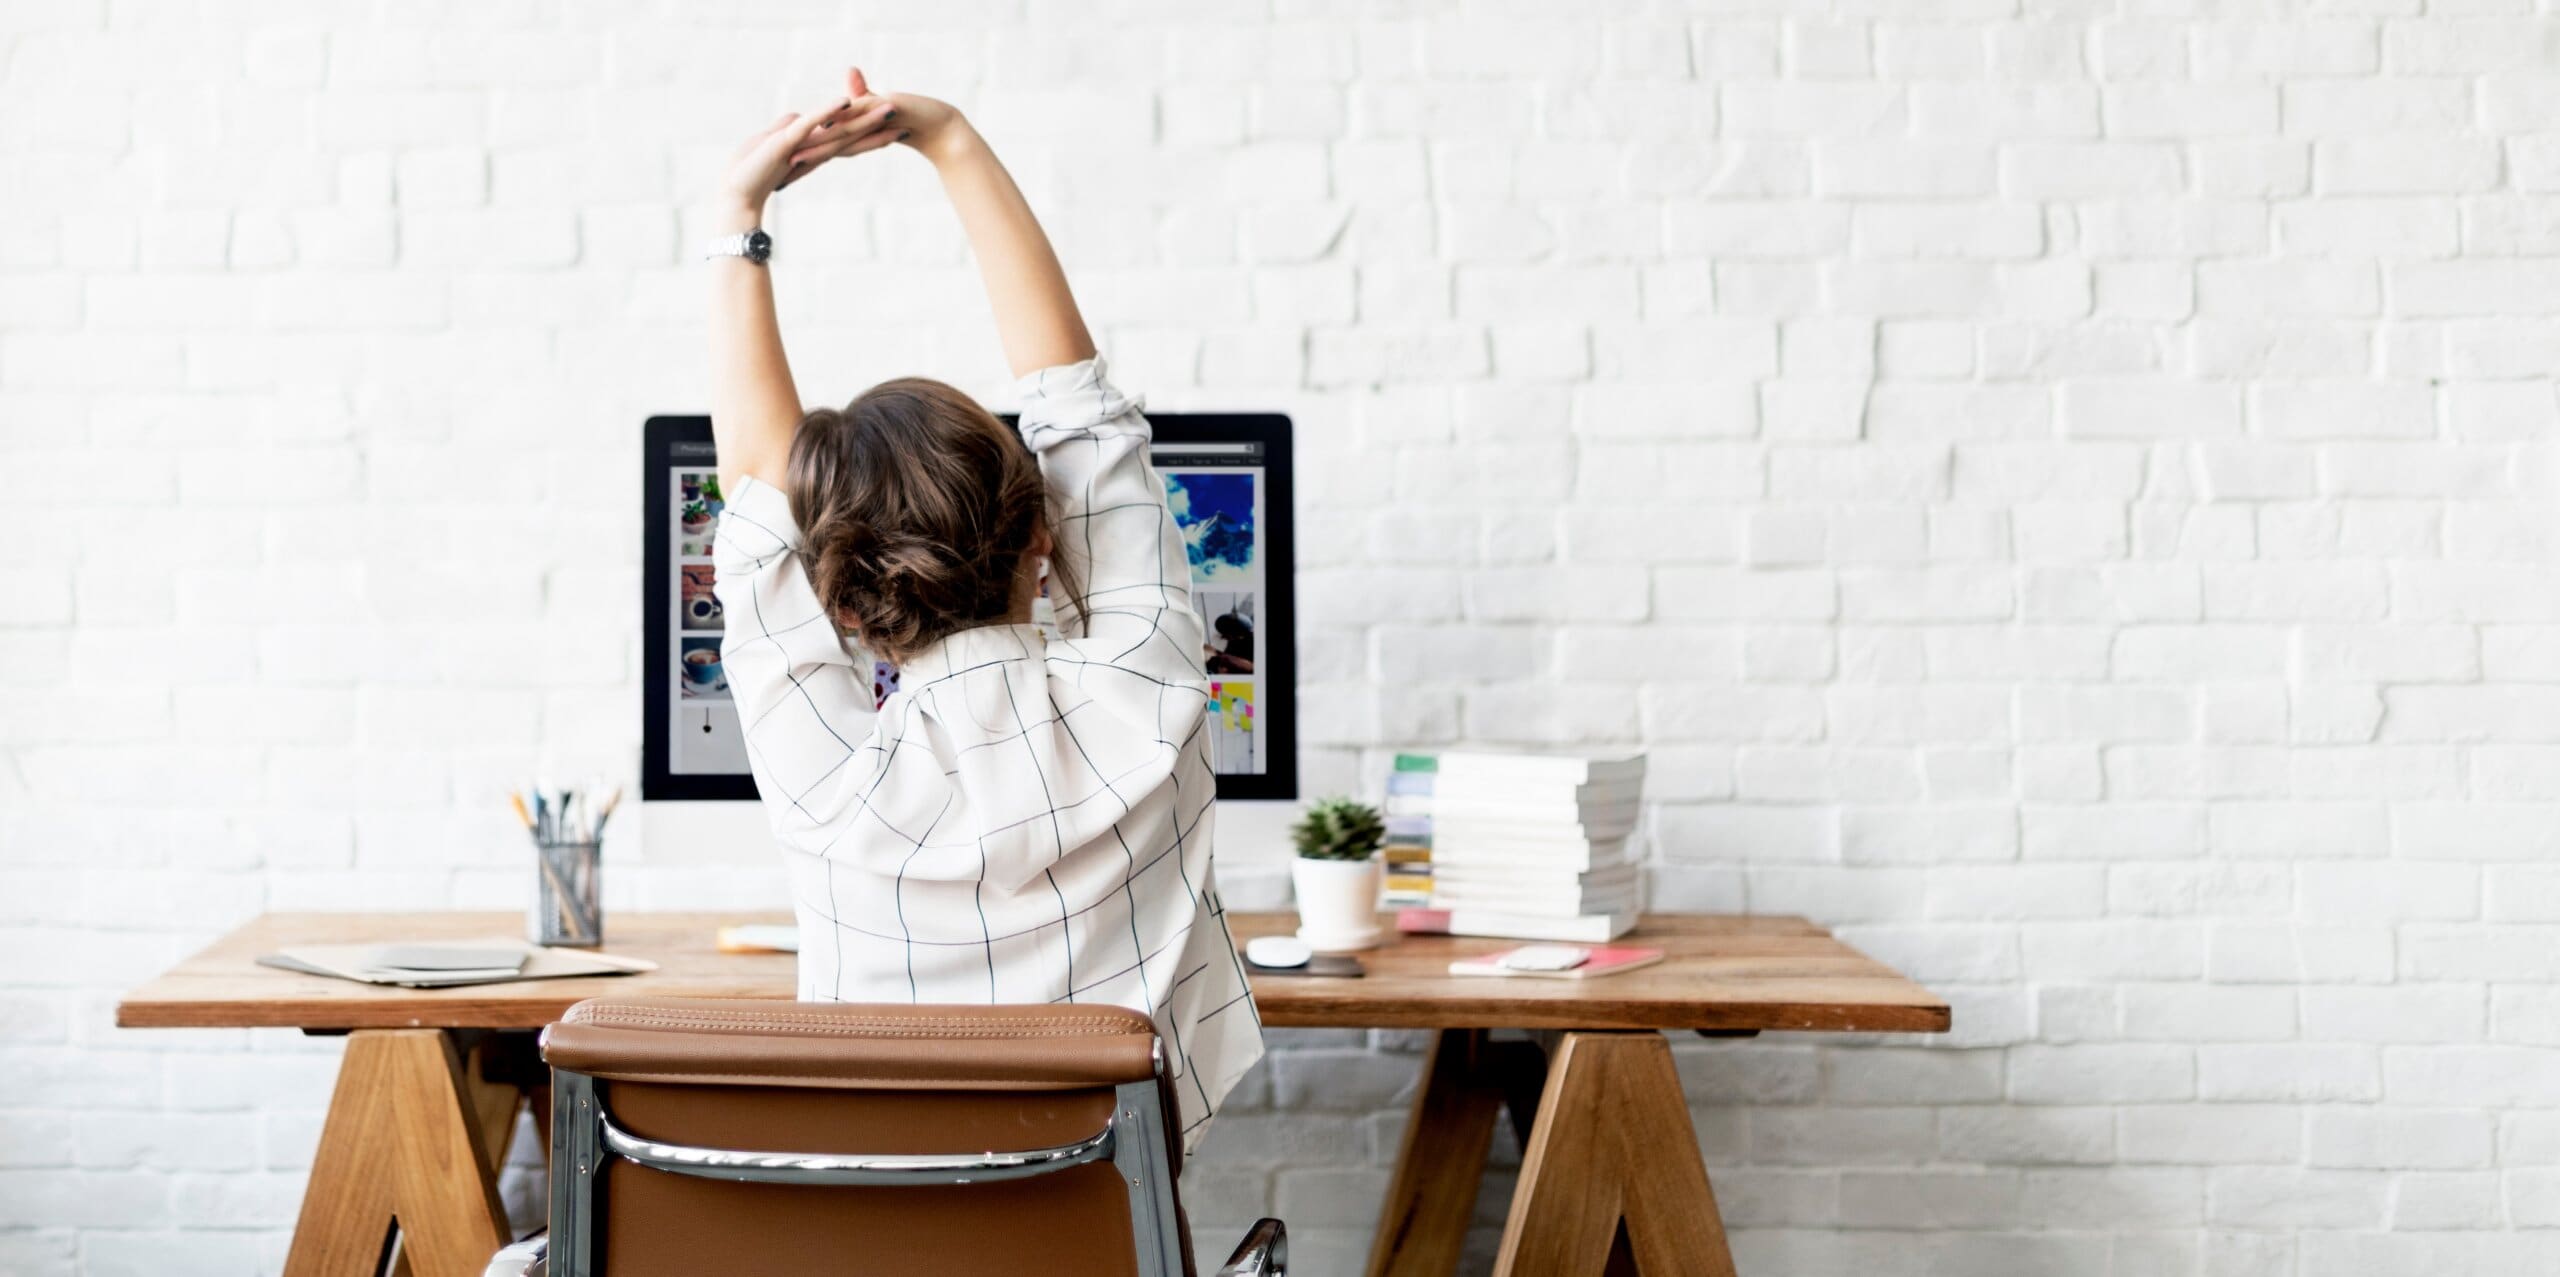 Shot of a woman from behind stretching her arms above her head at her work desk.